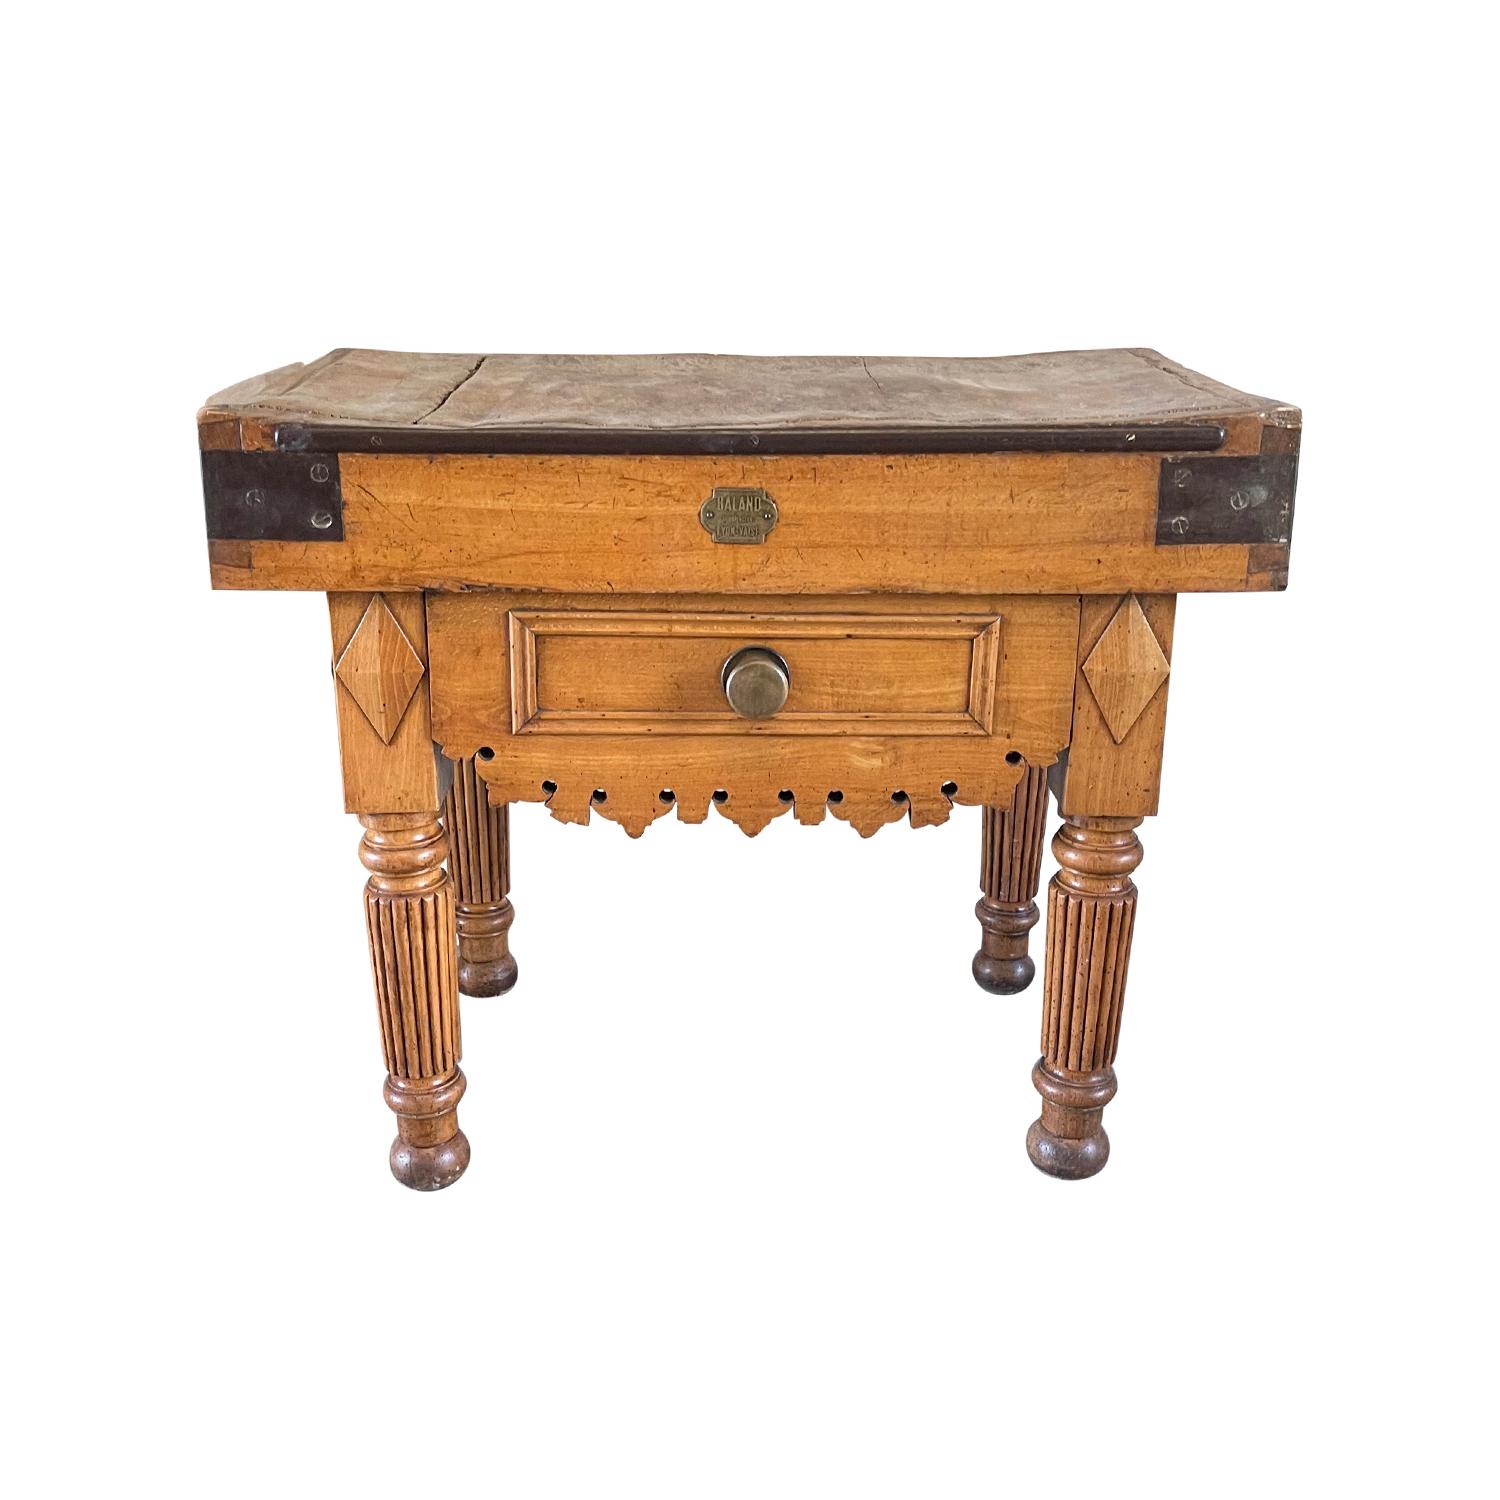 A late 19th Century, antique French Louis Philippe Butcher Block table made of hand crafted Beechwood, in good condition. Heavy wood corpus with Rhombus shaped detail on the fluted legs with a scalloped decorative apron and original brass hardware.